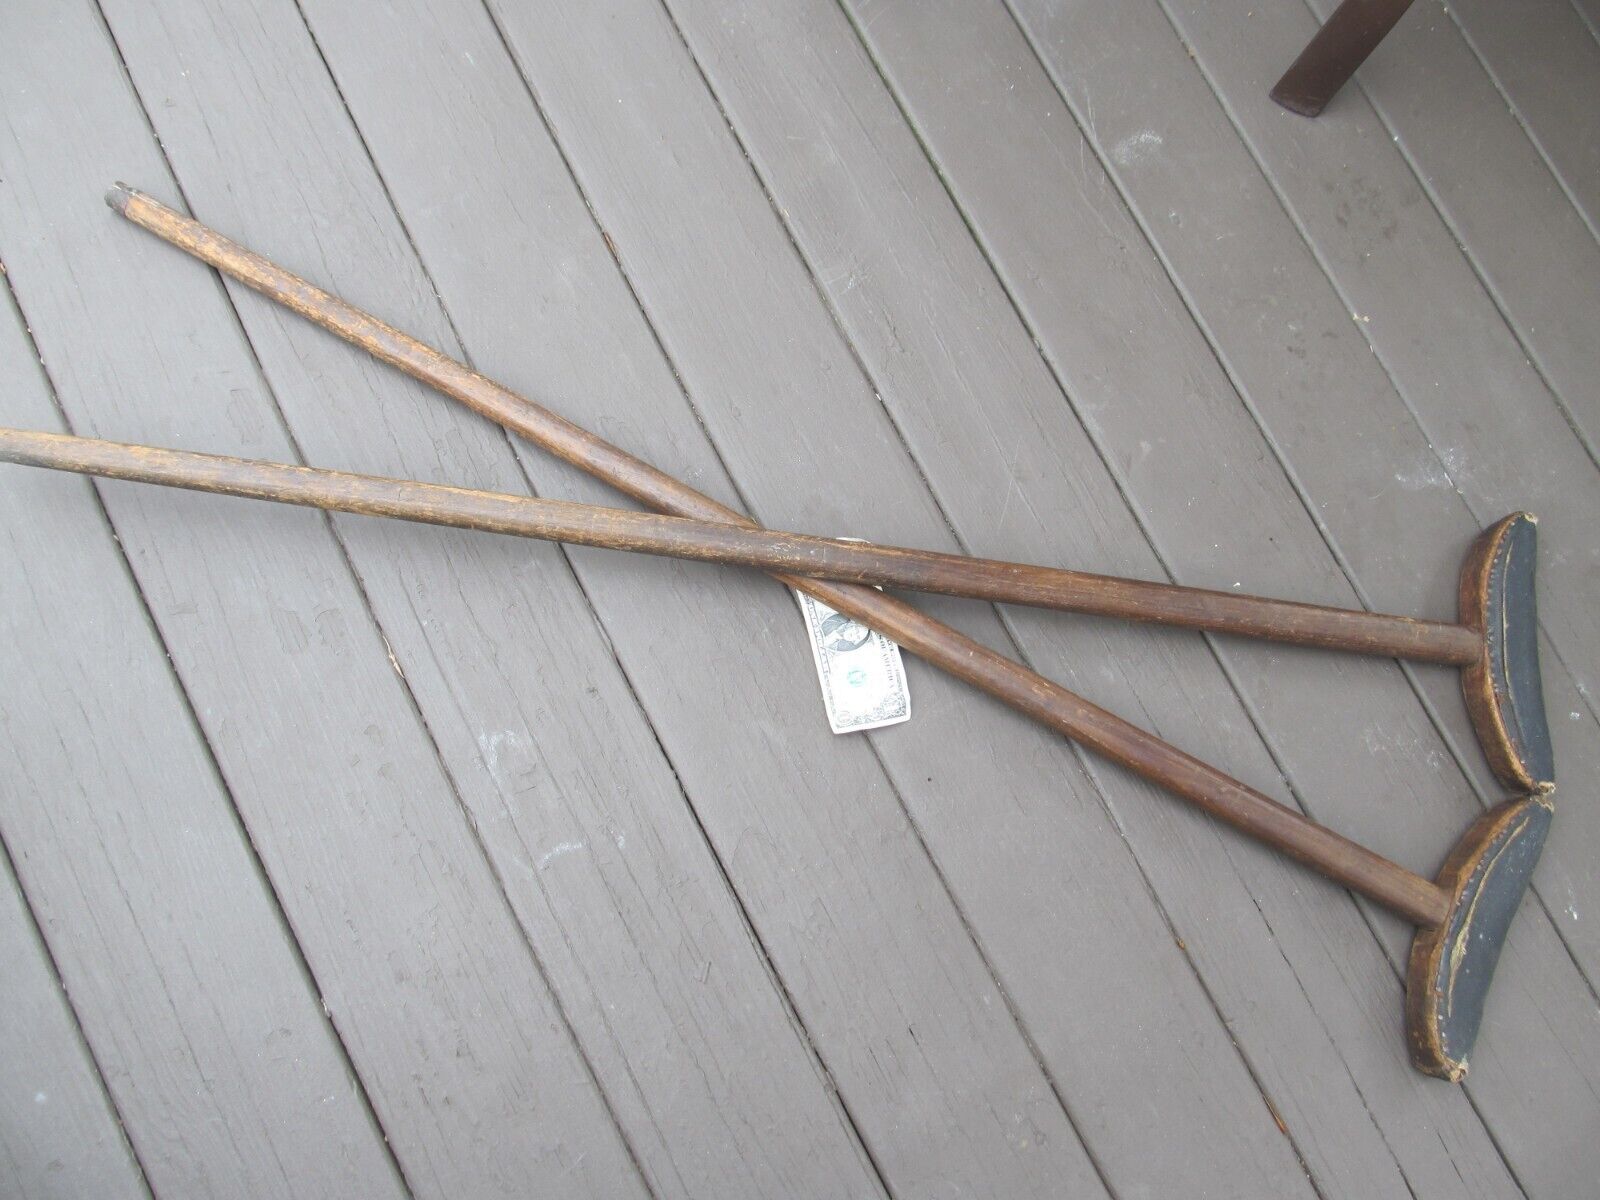 RARE Civil War Crutches, Marked USMD (Medical Dpt.), Wounded, Hospital, Doctor